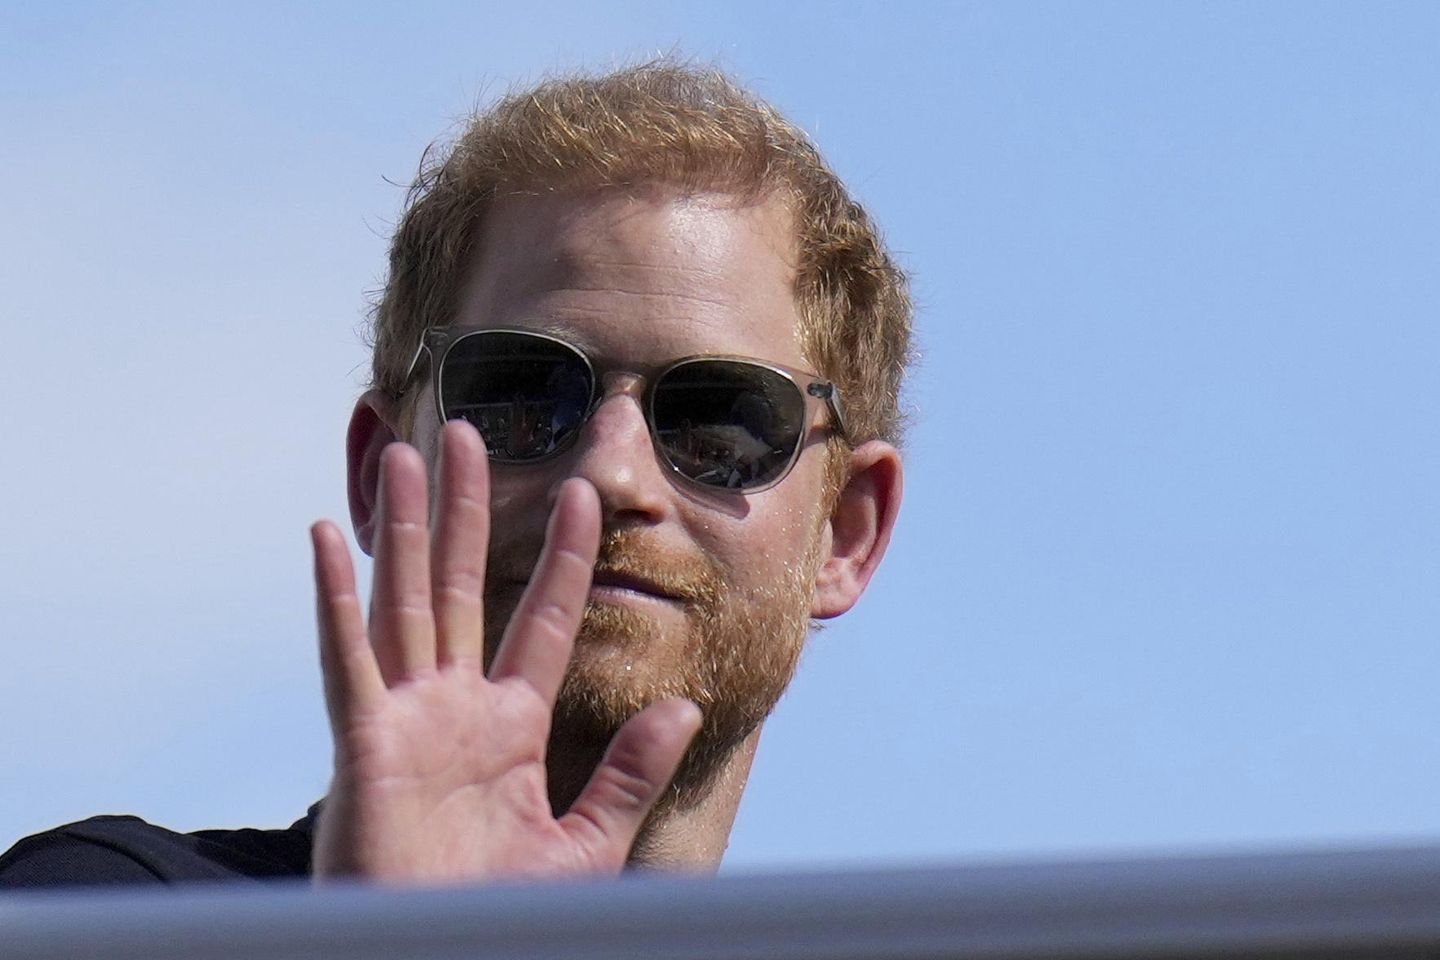 Britain's Prince Harry formally confirms he is now a U.S. resident
